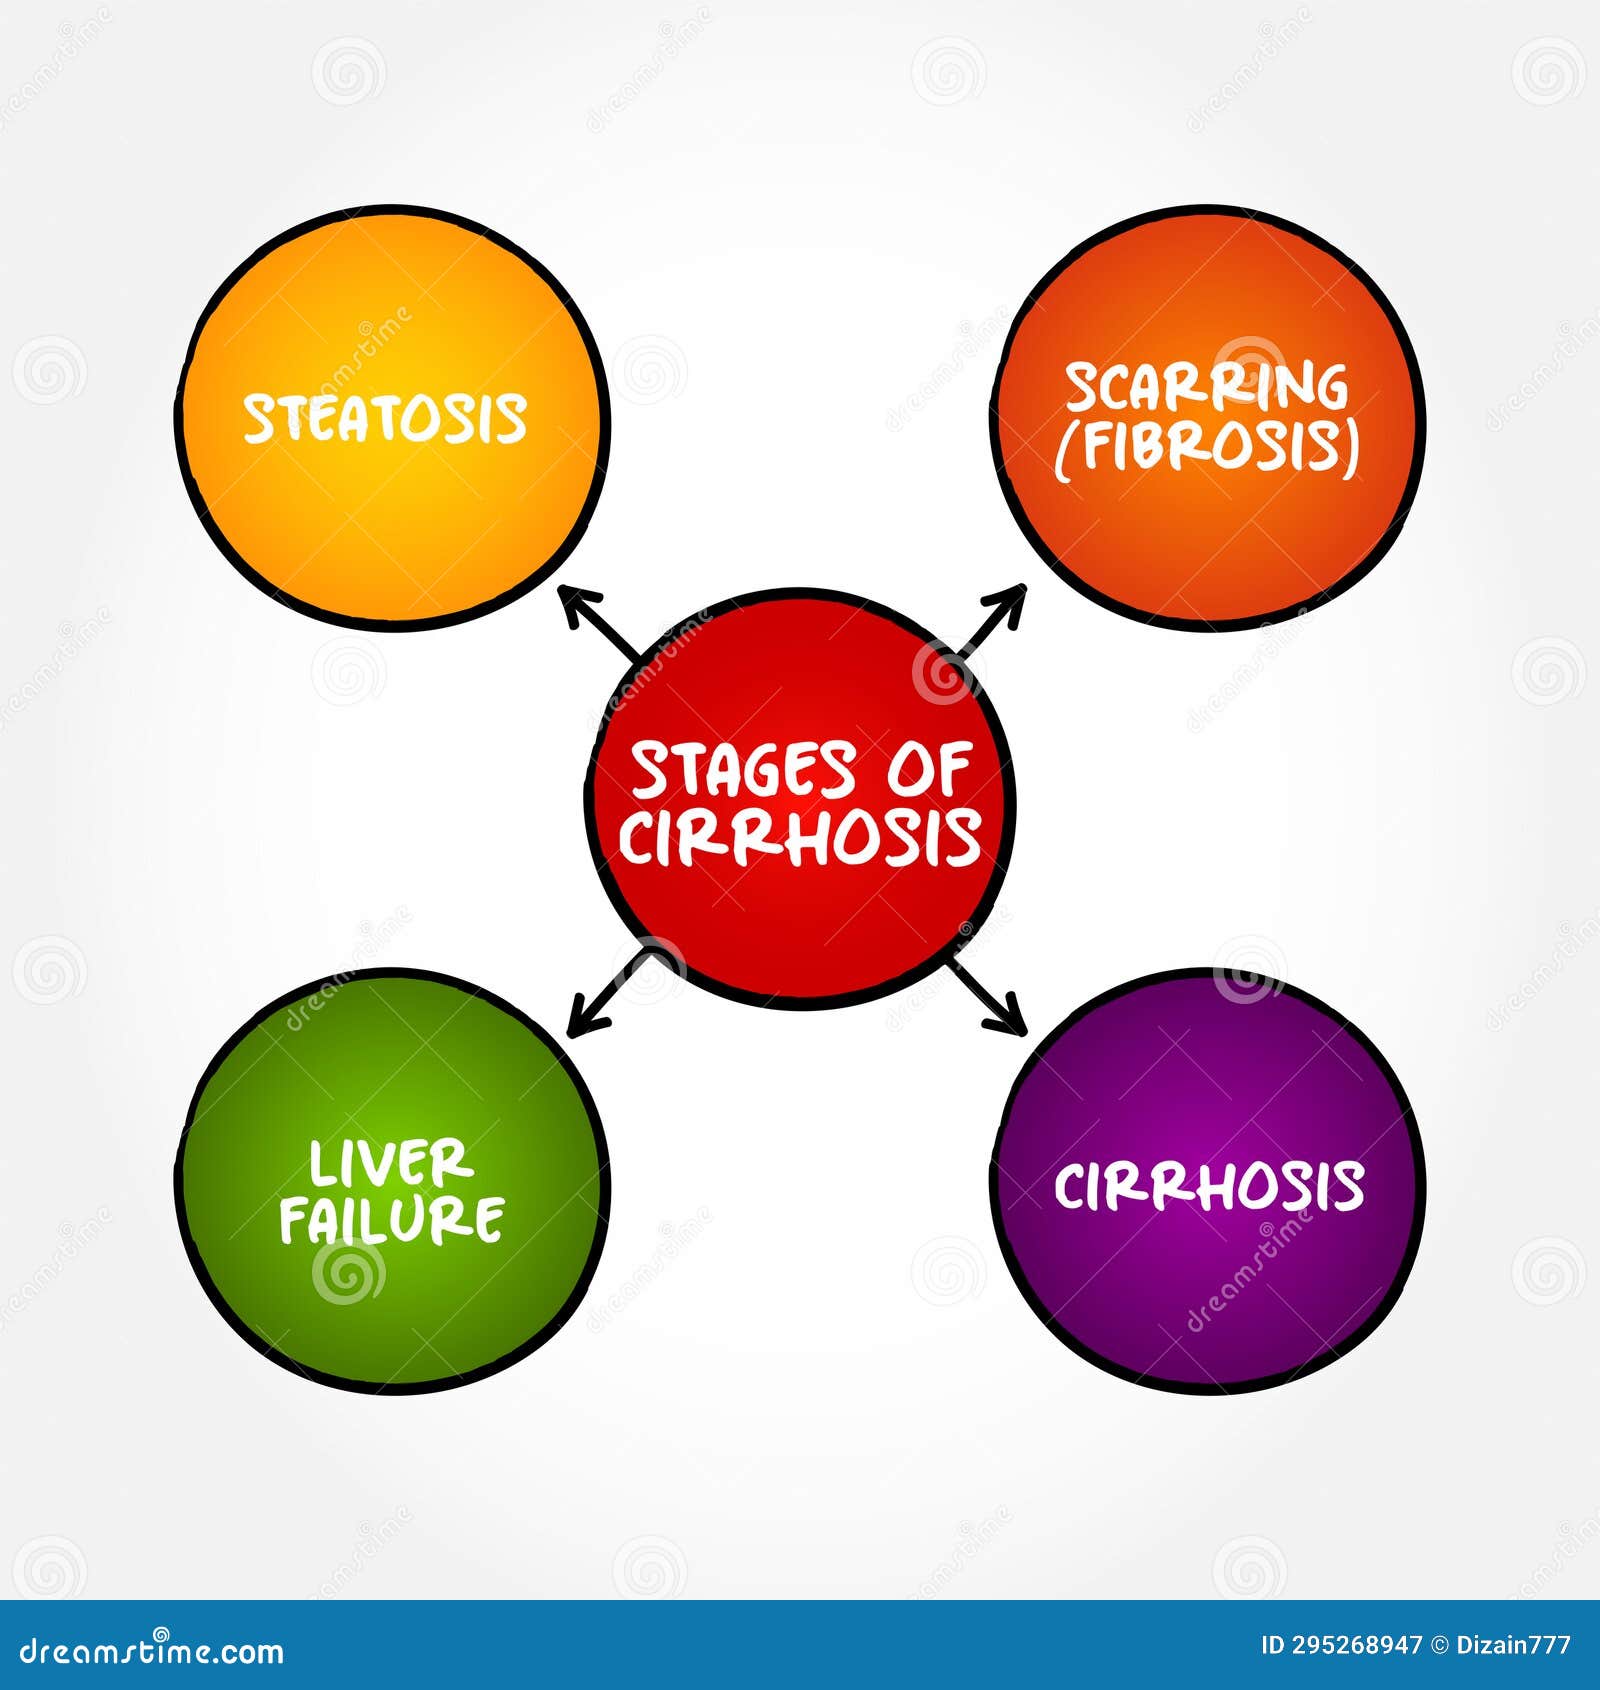 stages of cirrhosis - scarring of the liver caused by long-term liver damage